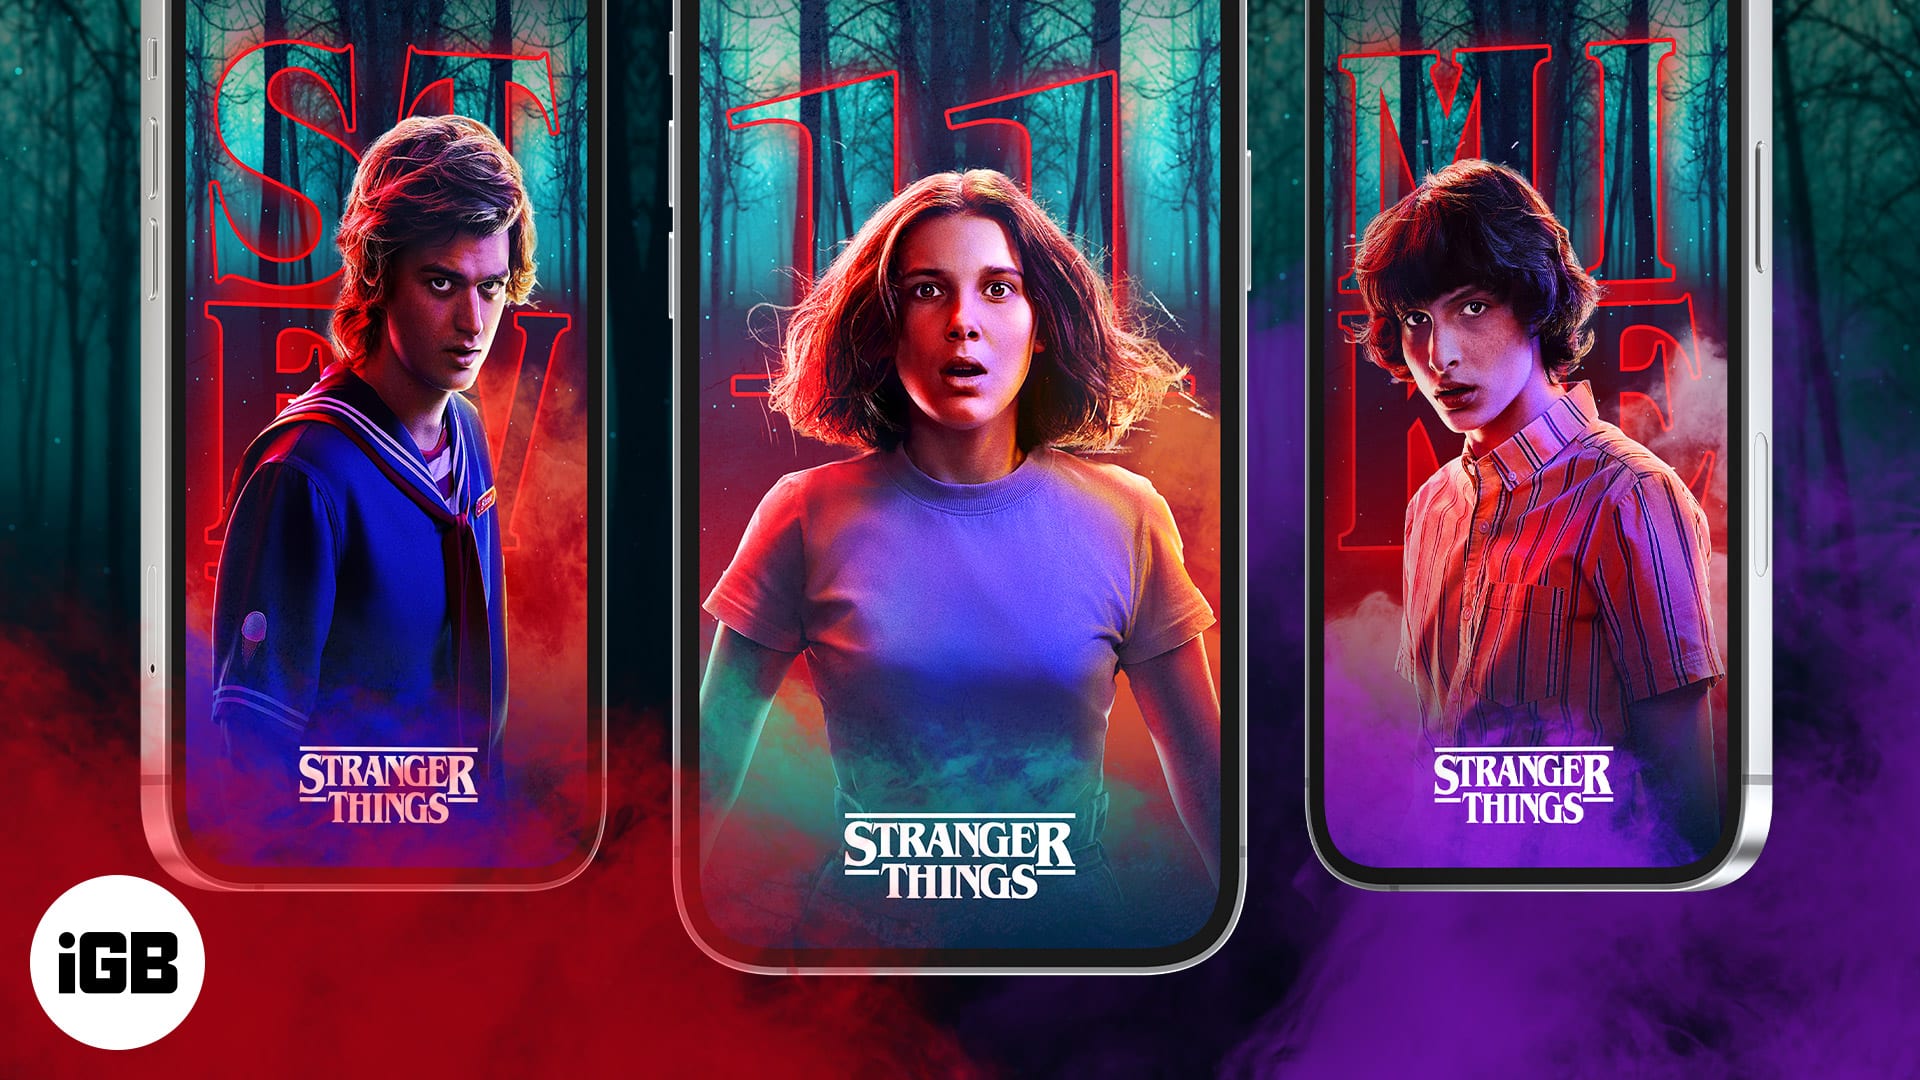 Eleven stranger things wallpapers for iphone in